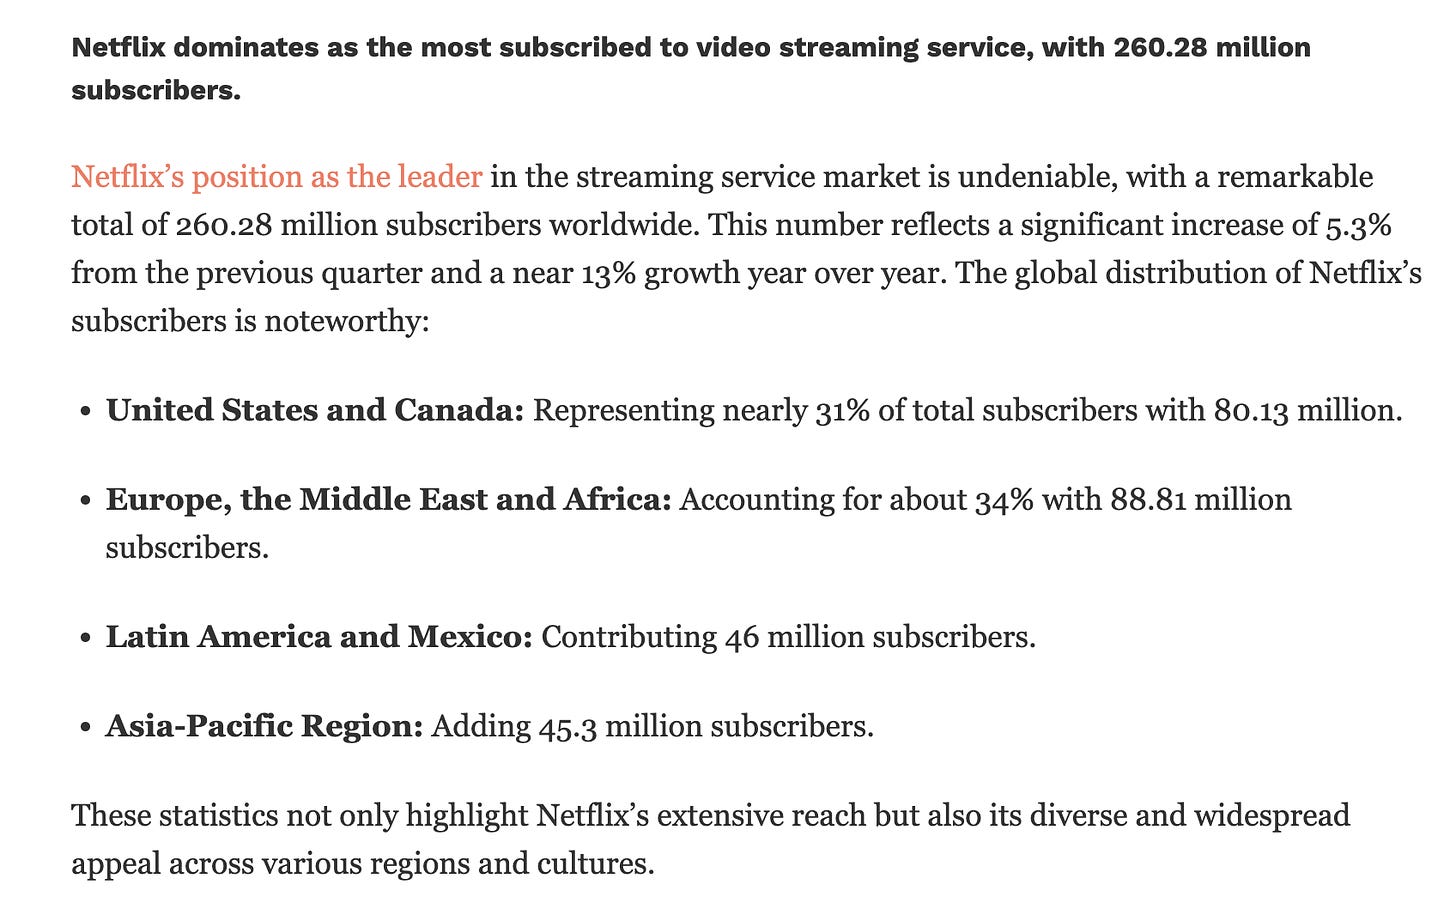 Netflix dominates as the most subscribed to video streaming service, with 260.28 million subscribers. Netflix’s position as the leader in the streaming service market is undeniable, with a remarkable total of 260.28 million subscribers worldwide. This number reflects a significant increase of 5.3% from the previous quarter and a near 13% growth year over year. The global distribution of Netflix’s subscribers is noteworthy:  United States and Canada: Representing nearly 31% of total subscribers with 80.13 million. Europe, the Middle East and Africa: Accounting for about 34% with 88.81 million subscribers. Latin America and Mexico: Contributing 46 million subscribers. Asia-Pacific Region: Adding 45.3 million subscribers. These statistics not only highlight Netflix’s extensive reach but also its diverse and widespread appeal across various regions and cultures.